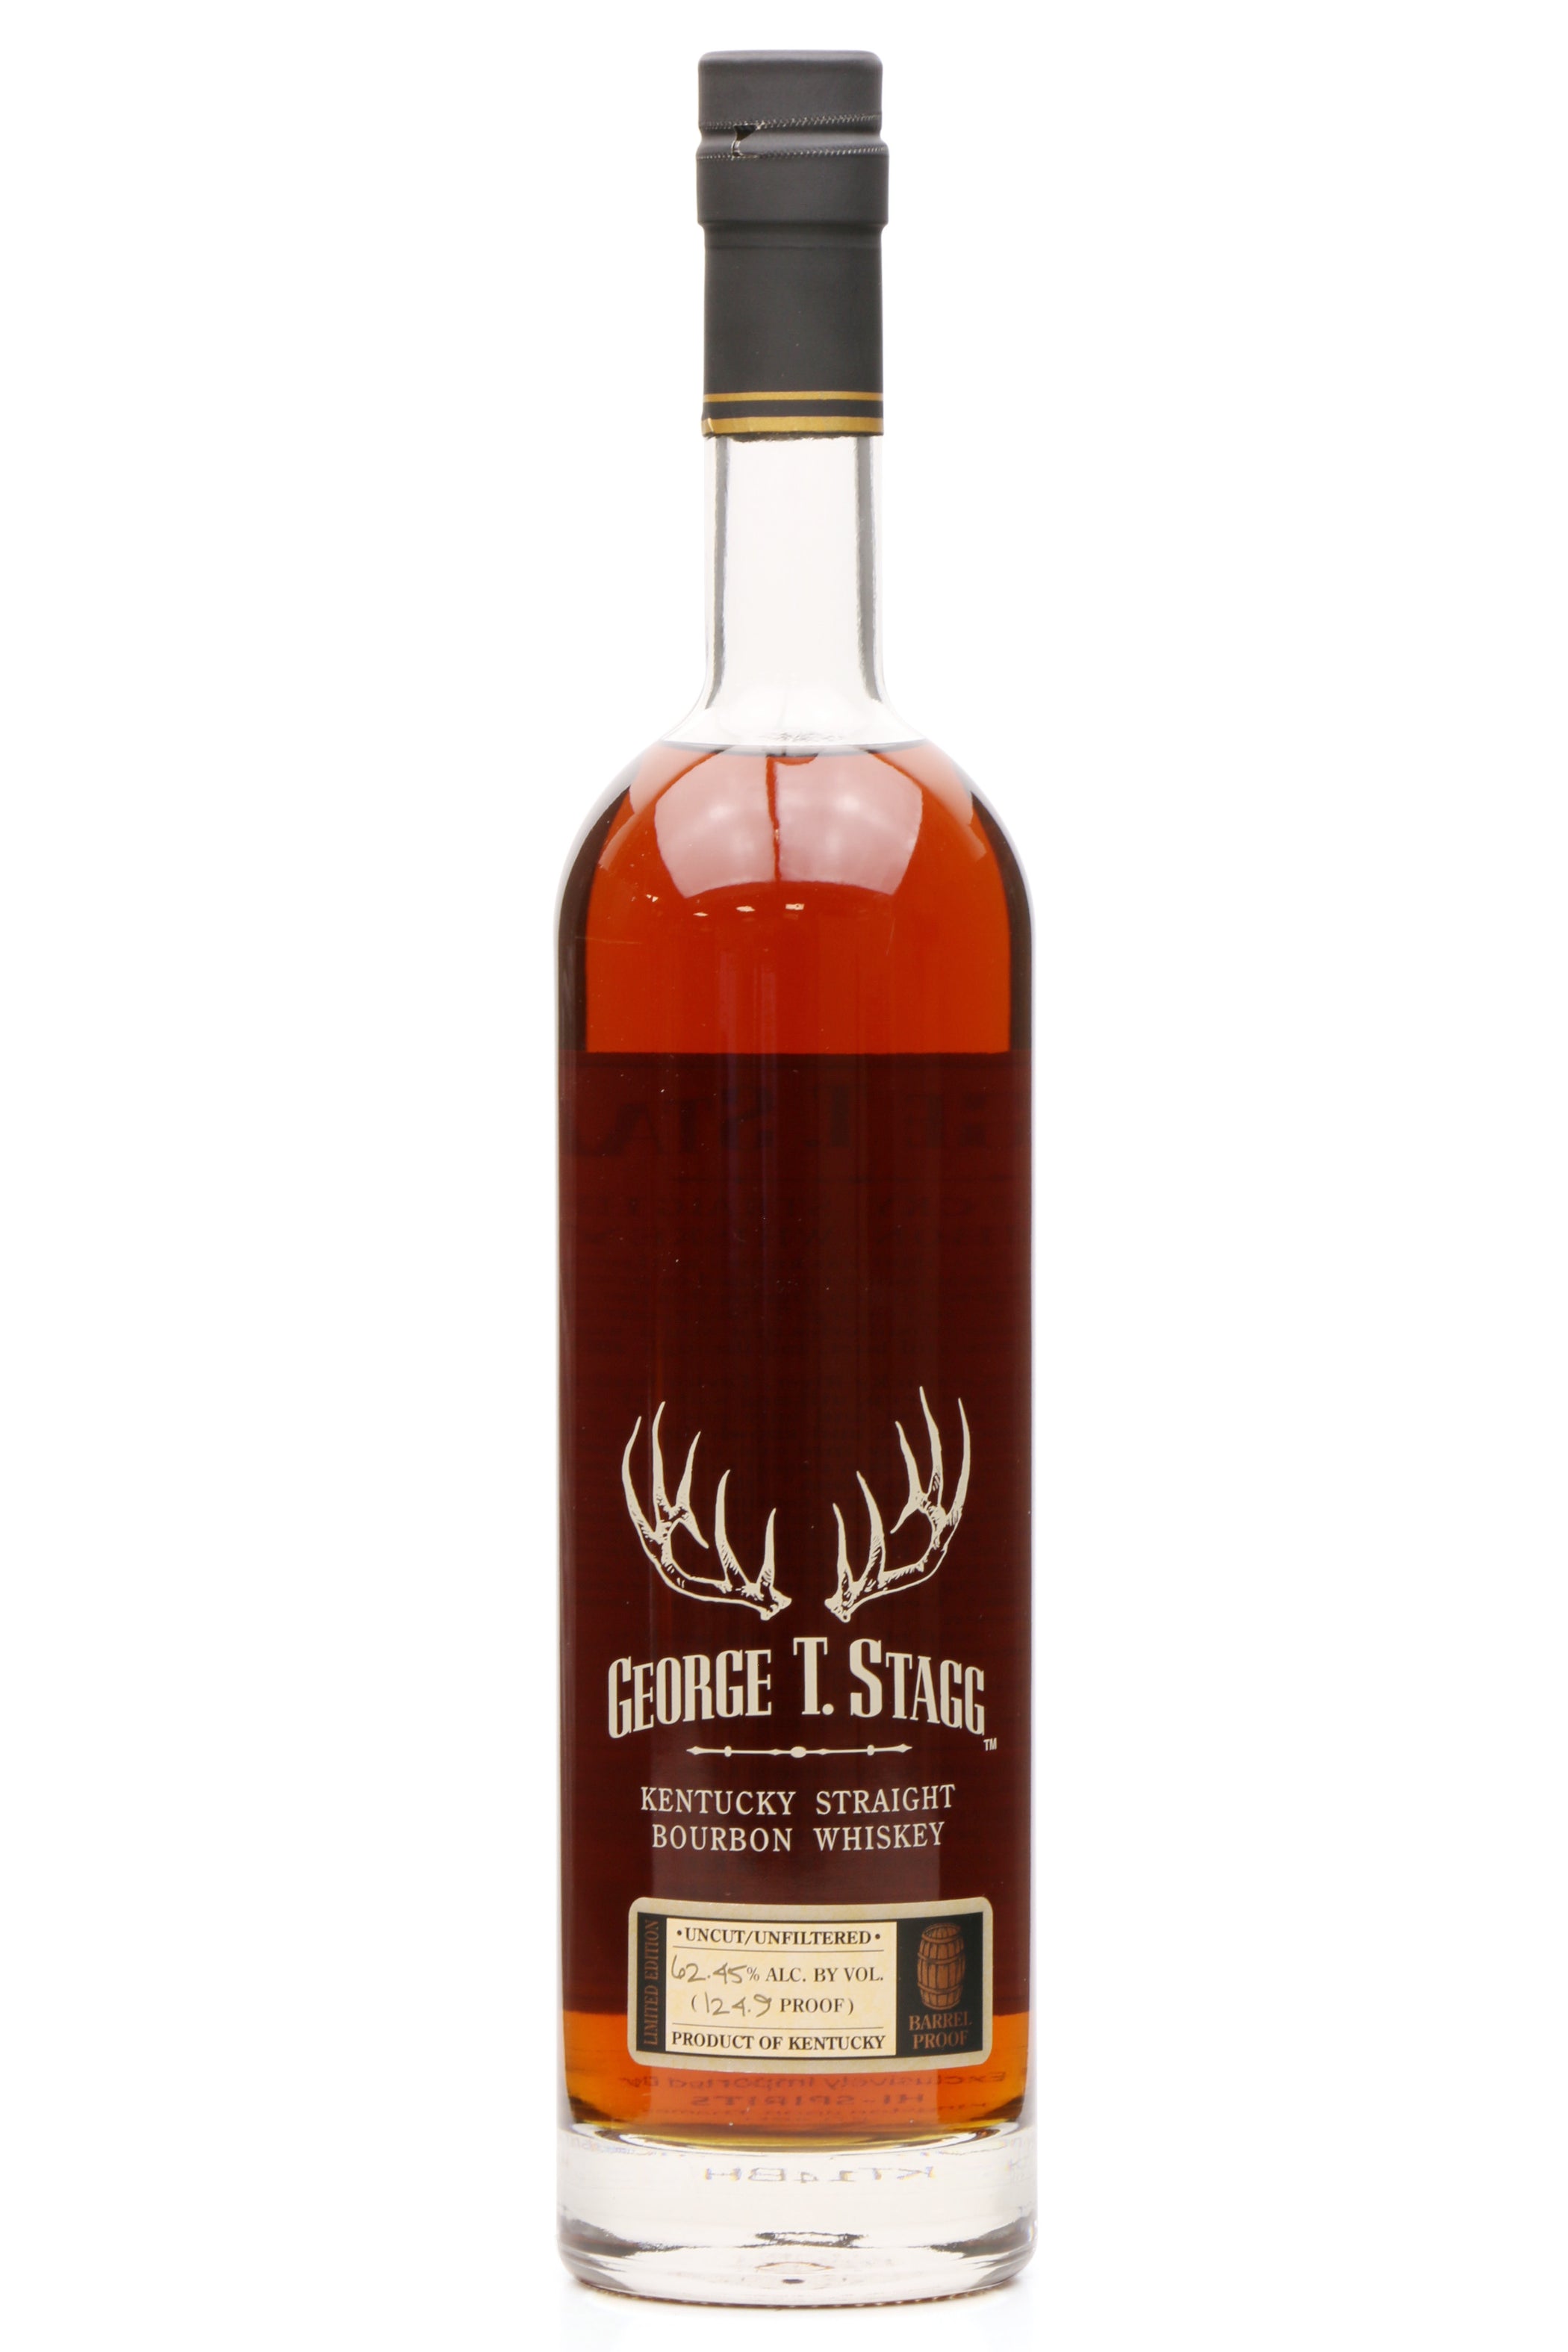 [BUY] T. Stagg 2018 Release 62.45 ABV Kentucky Straight Bourbon